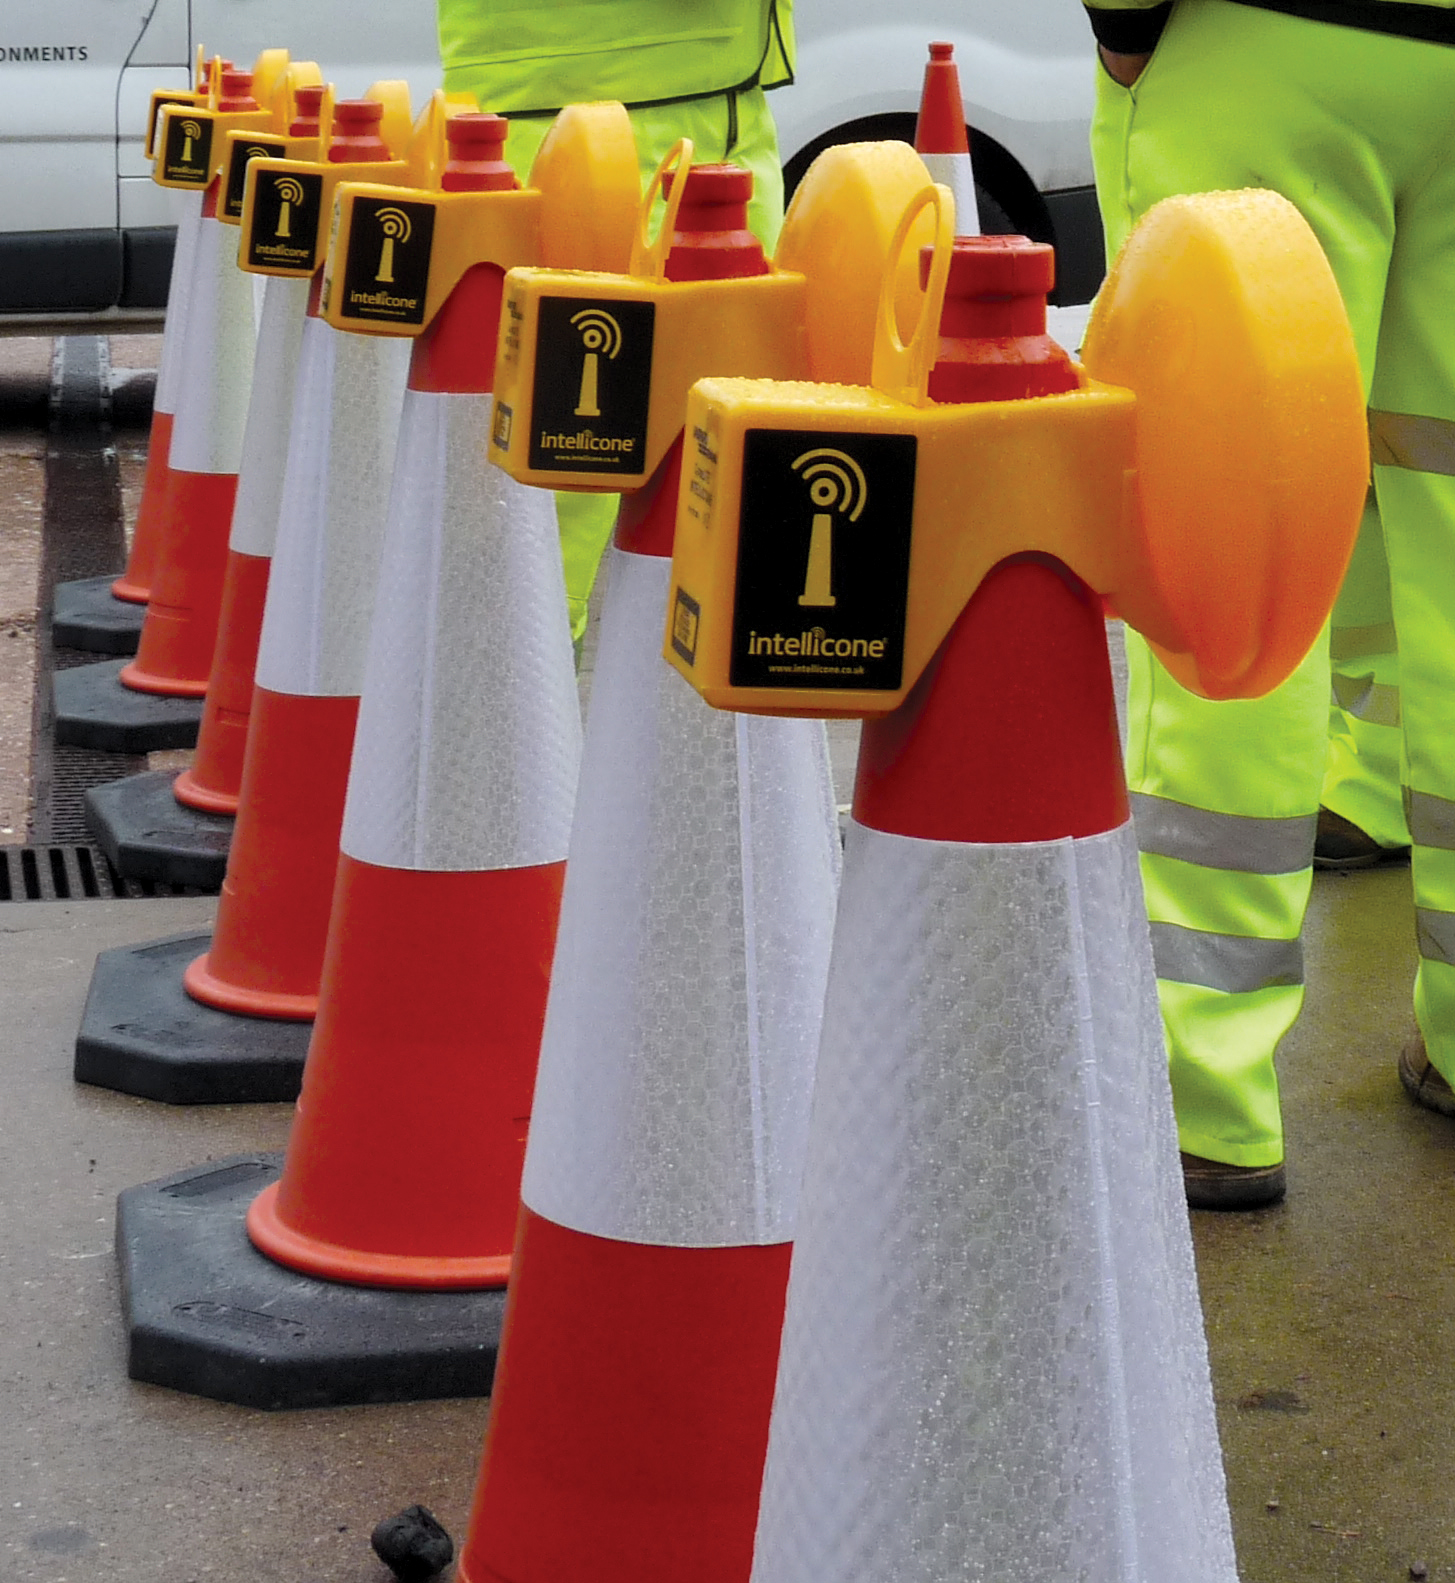 Intellicone roadworker safety system from New Wave Innovation 